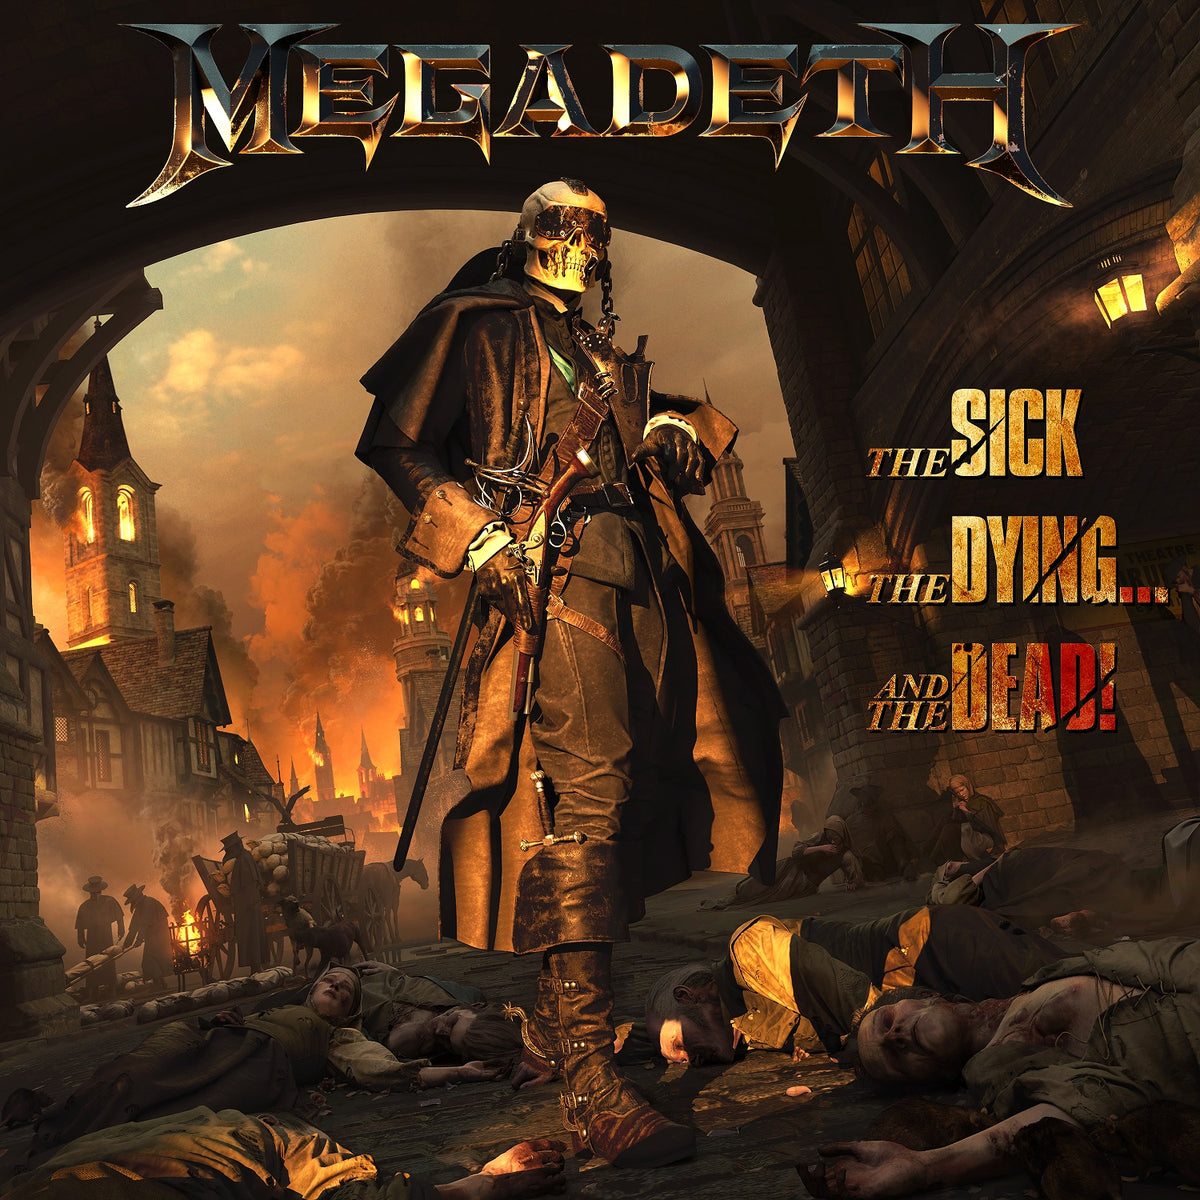 Megadeth - The Sick, The Dying And The Dead! (180 Gram Vinyl) (2 Lp's) - Vinyl